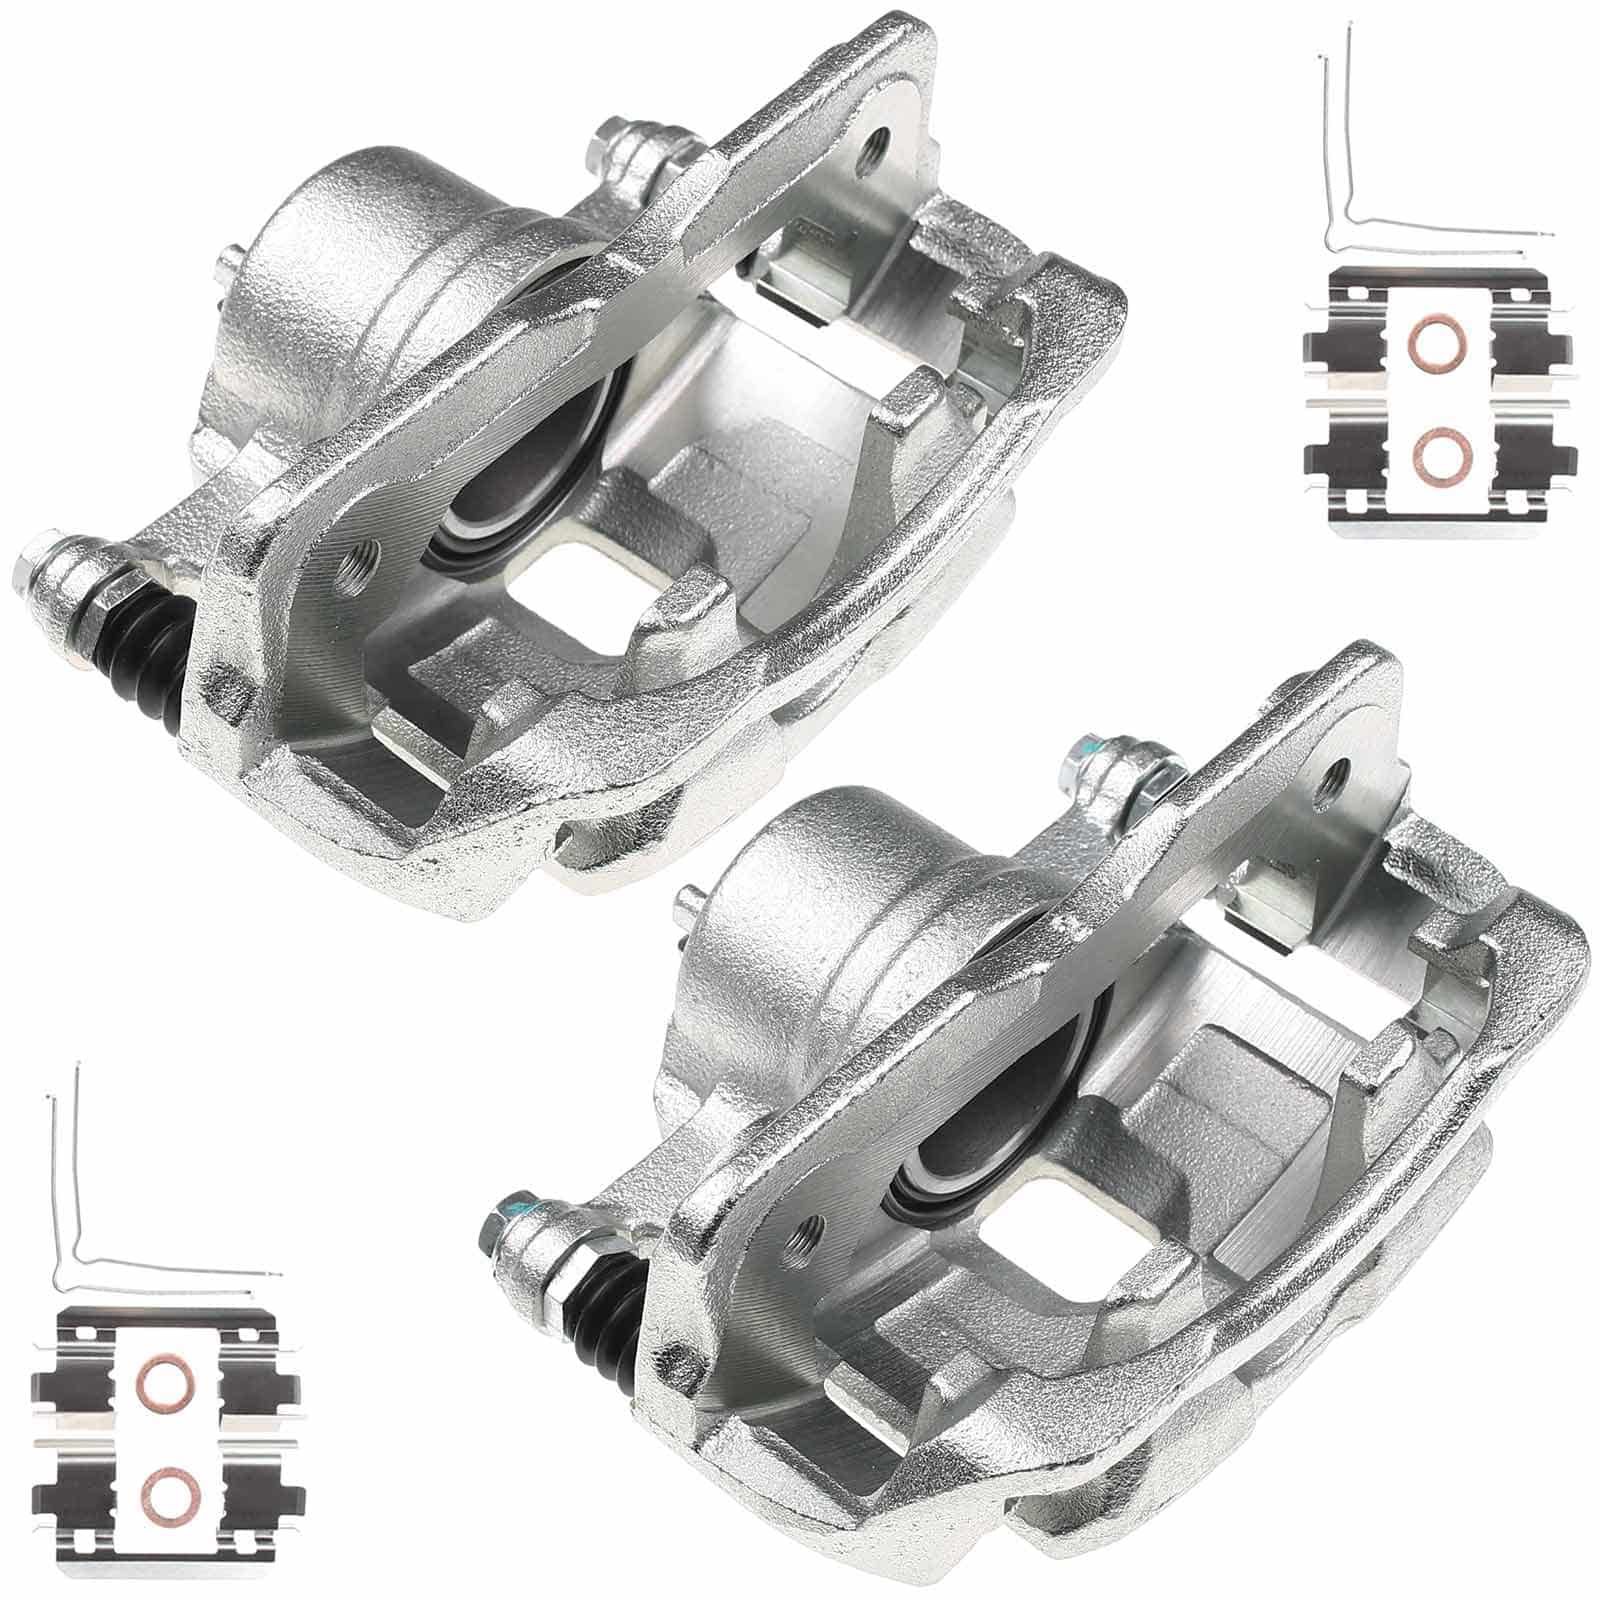 2 Pcs Front Brake Caliper with Bracket for Honda Civic 2012-2015 Fit CR-Z Acura ILX